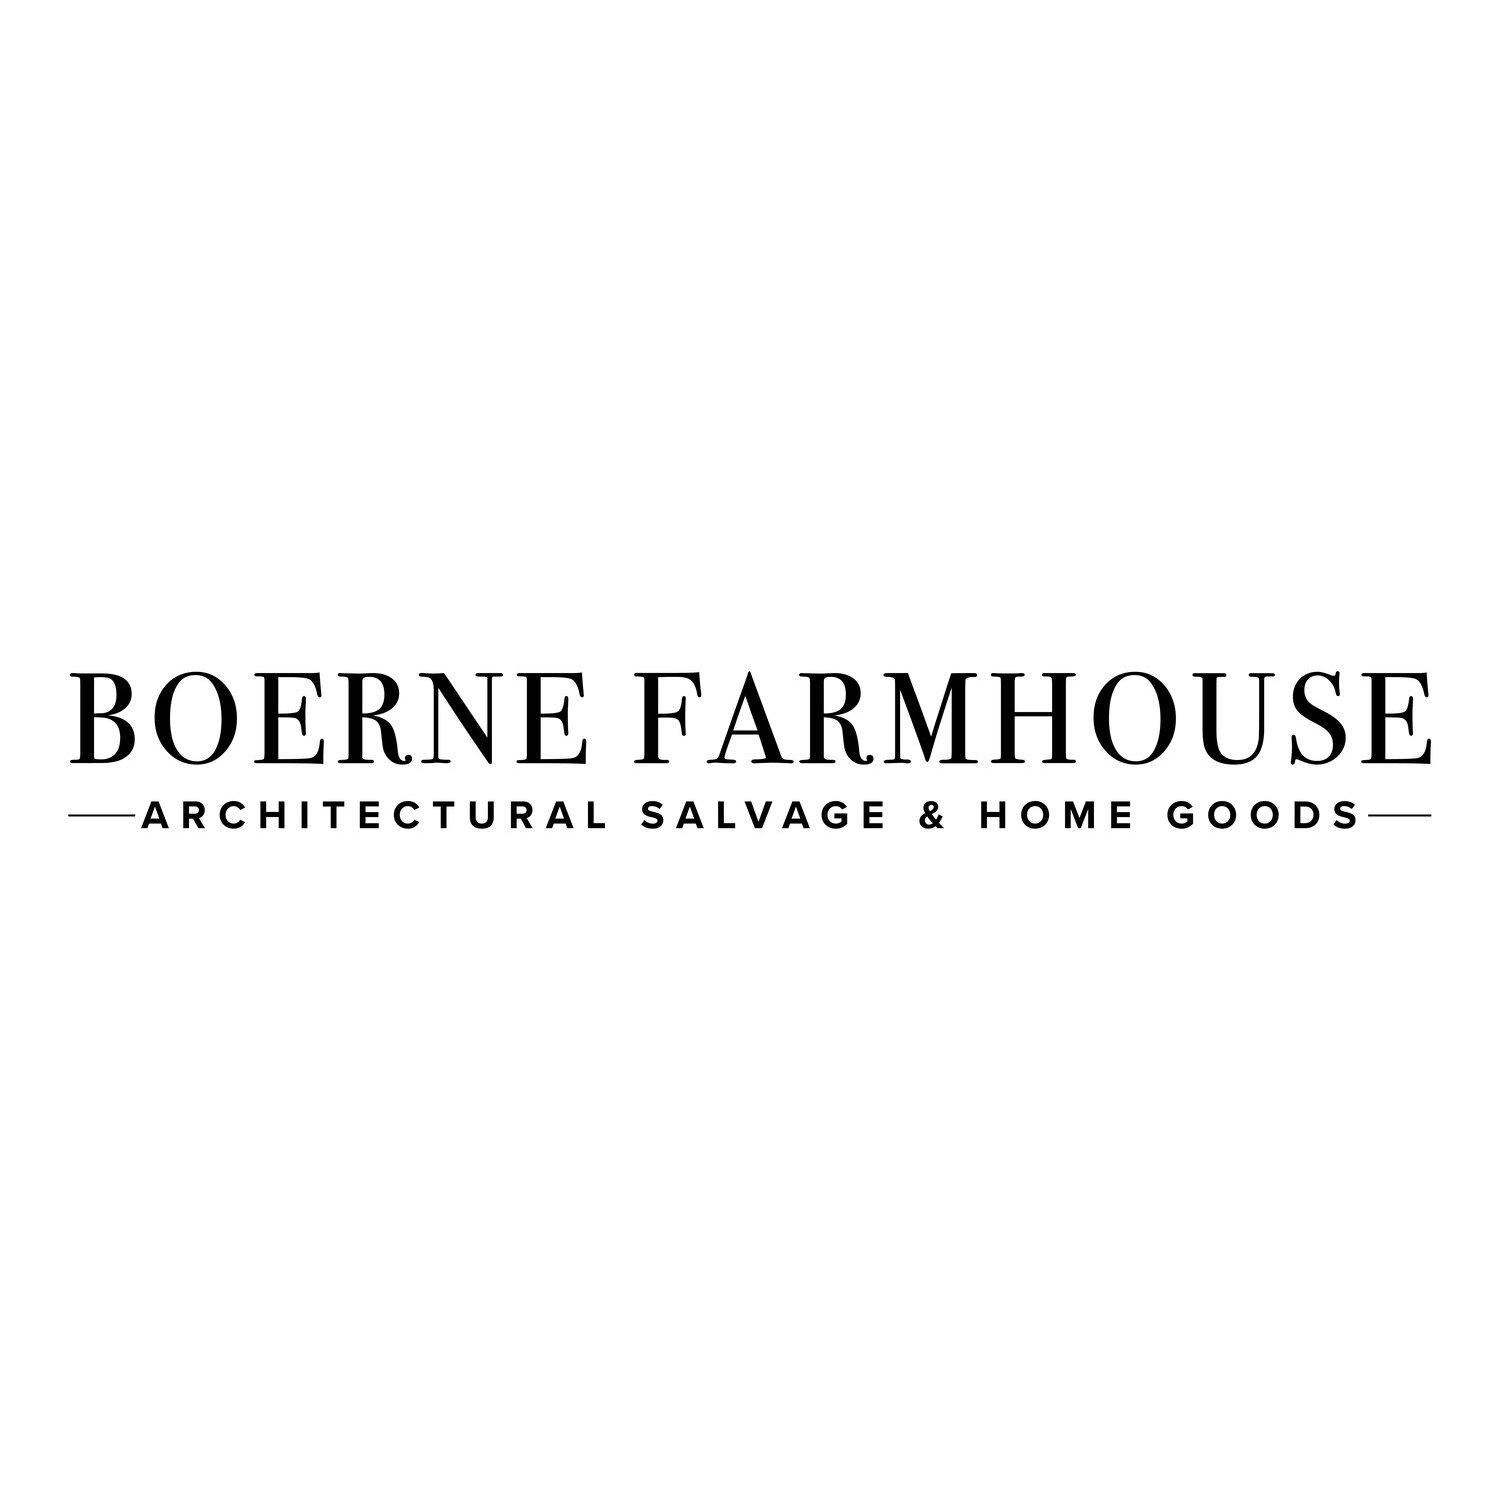 Boerne Farmhouse - Architectural Salvage & Home Goods